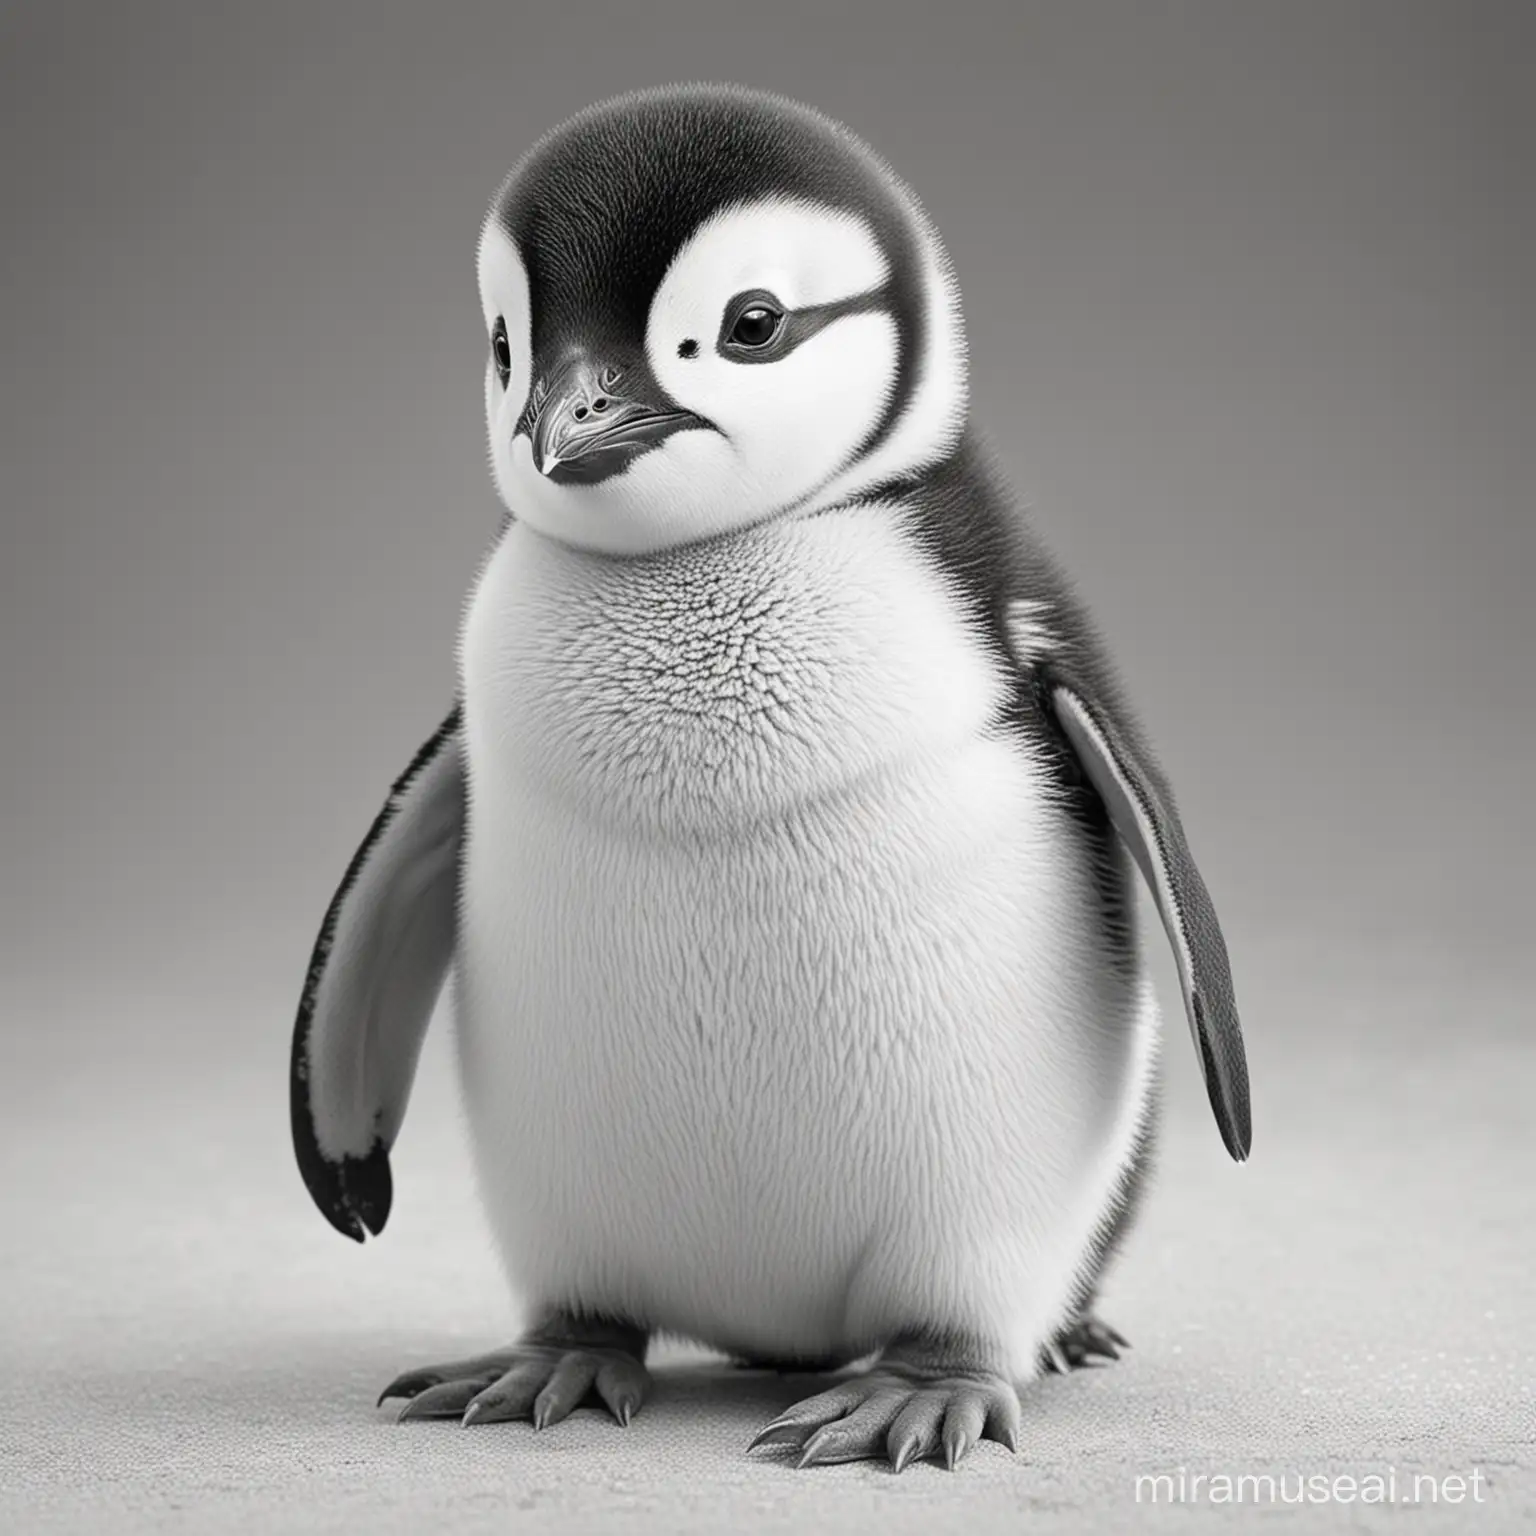 Adorable Black and White Baby Penguin Illustration for Coloring Enthusiasts